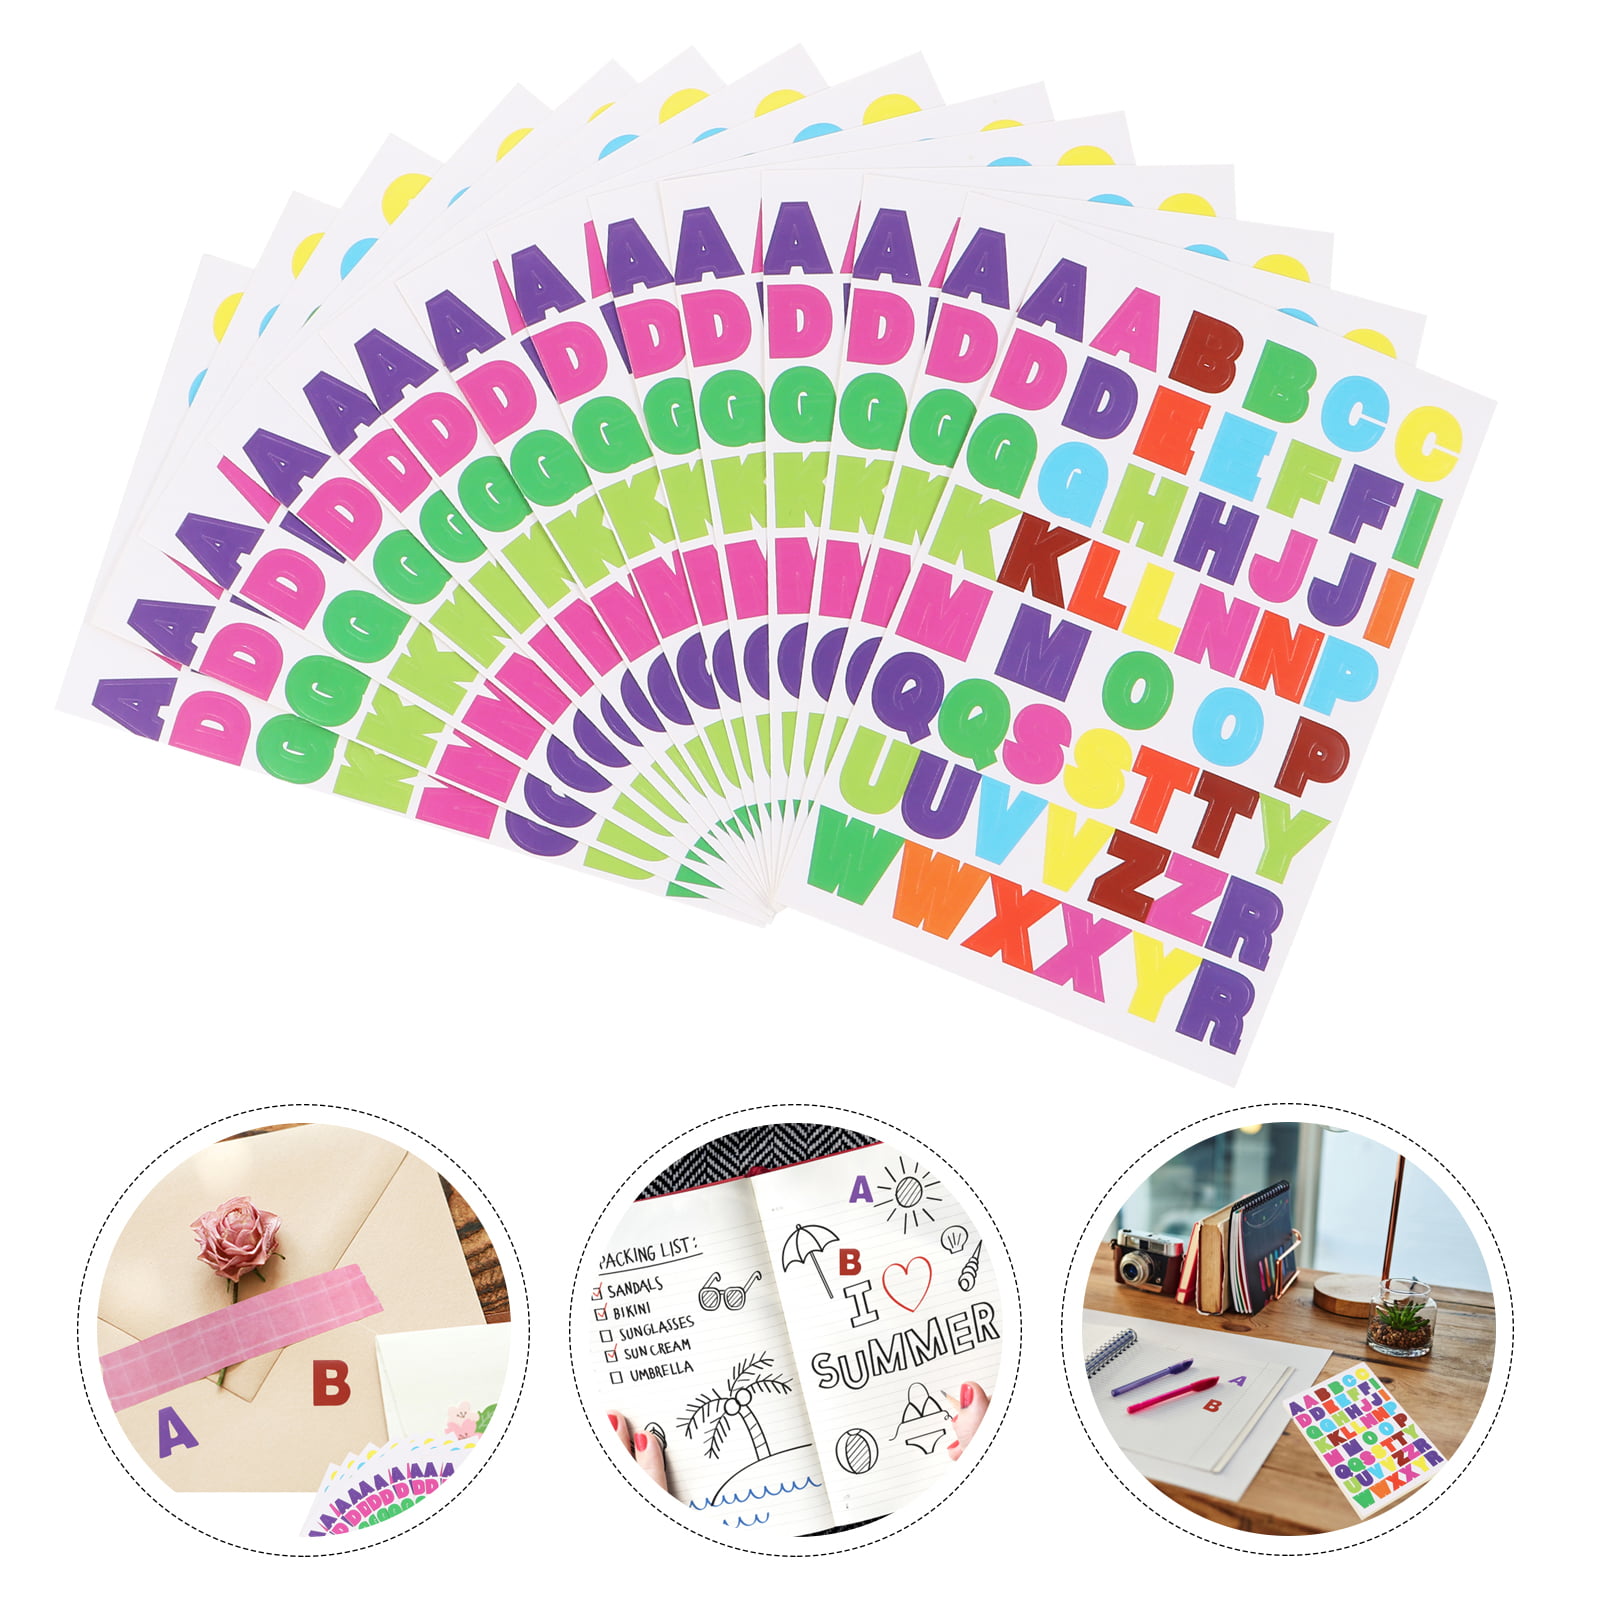 Wholesale waterproof alphabet stickers For Easy Decorative Displays 